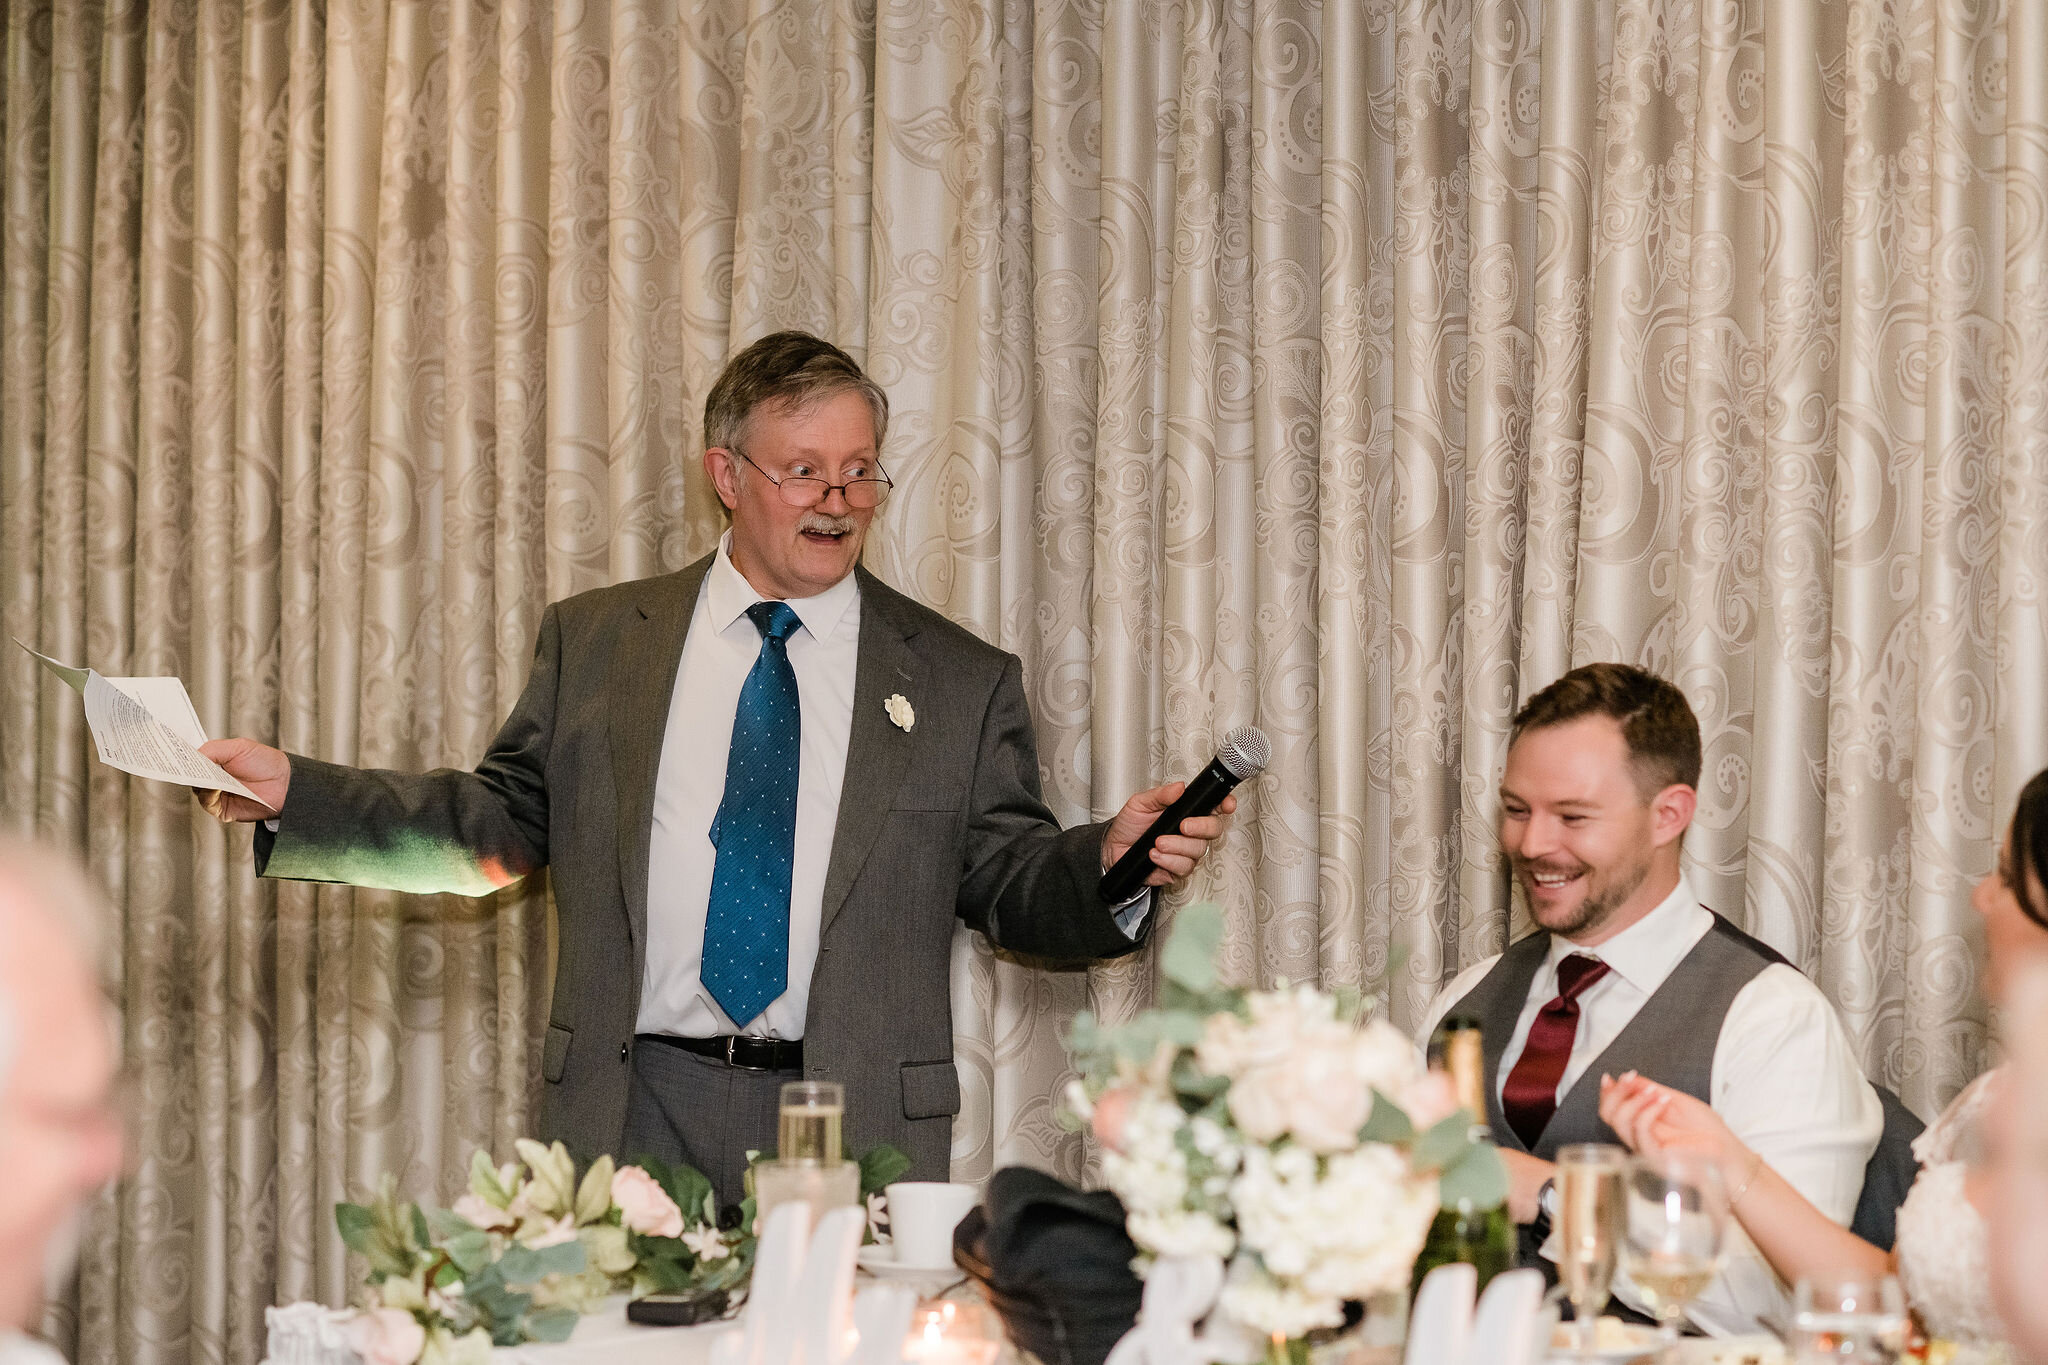 Father of the bride speaking